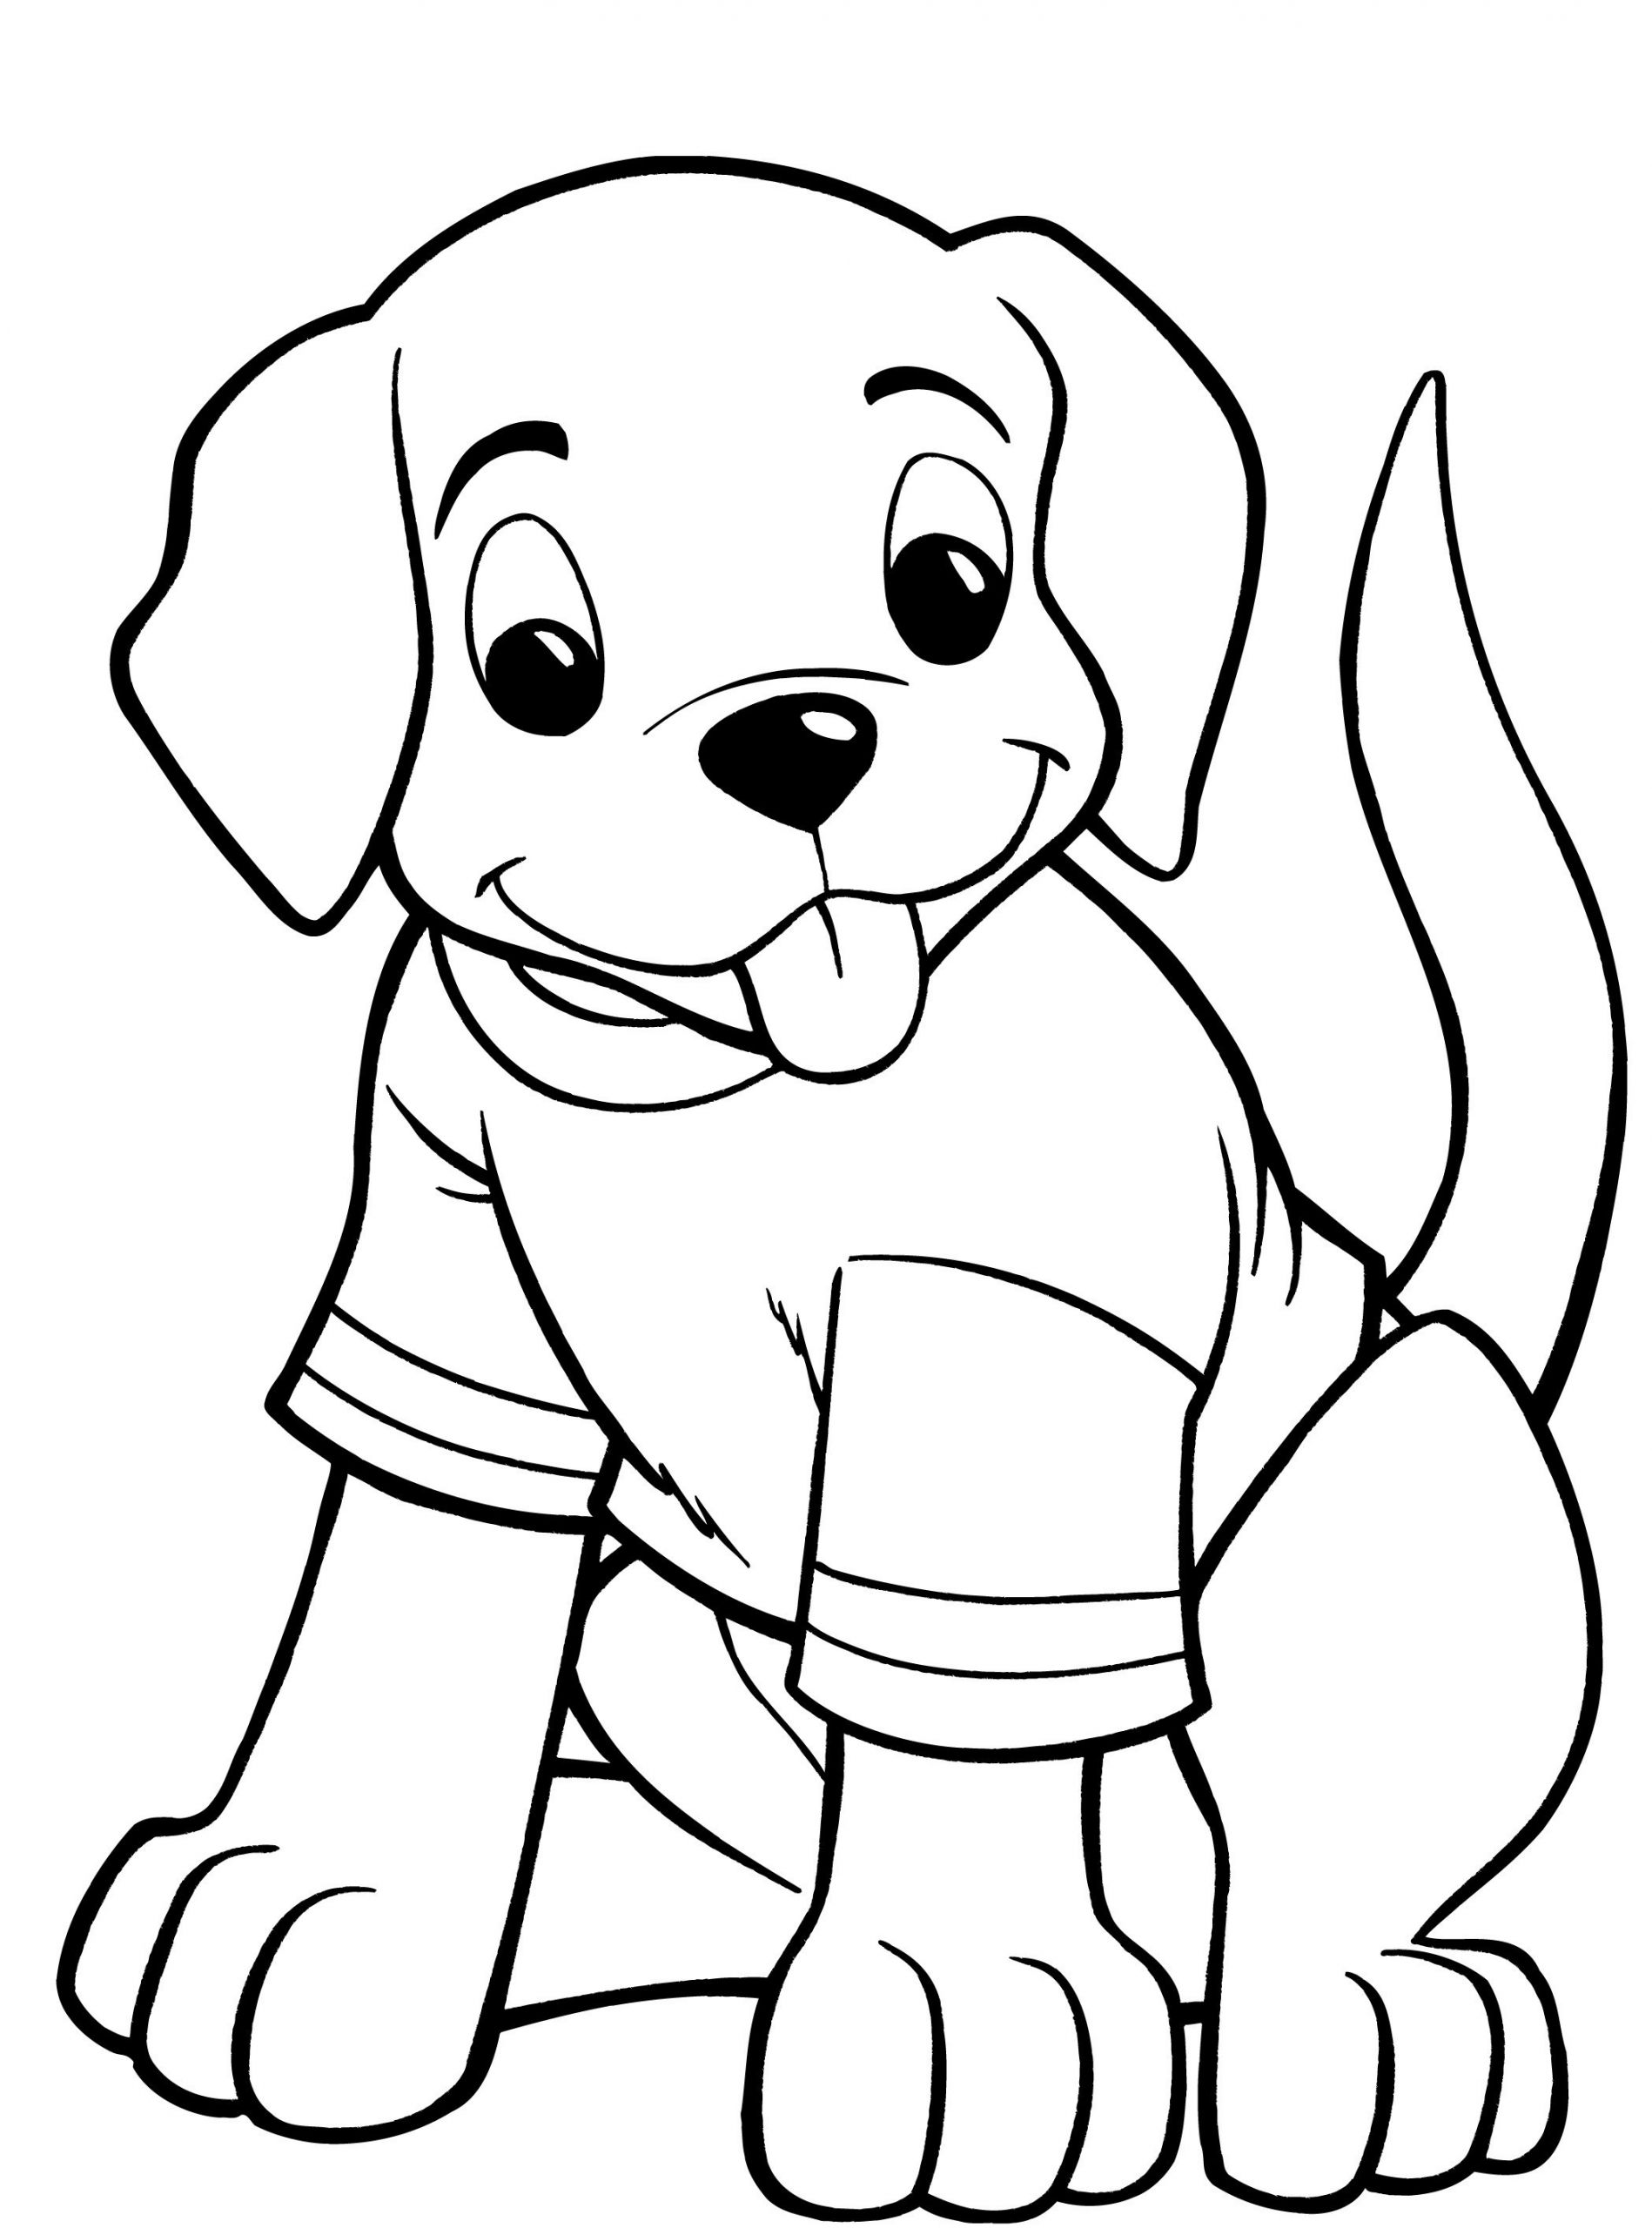 Dog Coloring Pages For Kids
 Dog Coloring Pages For Kids Preschool and Kindergarten